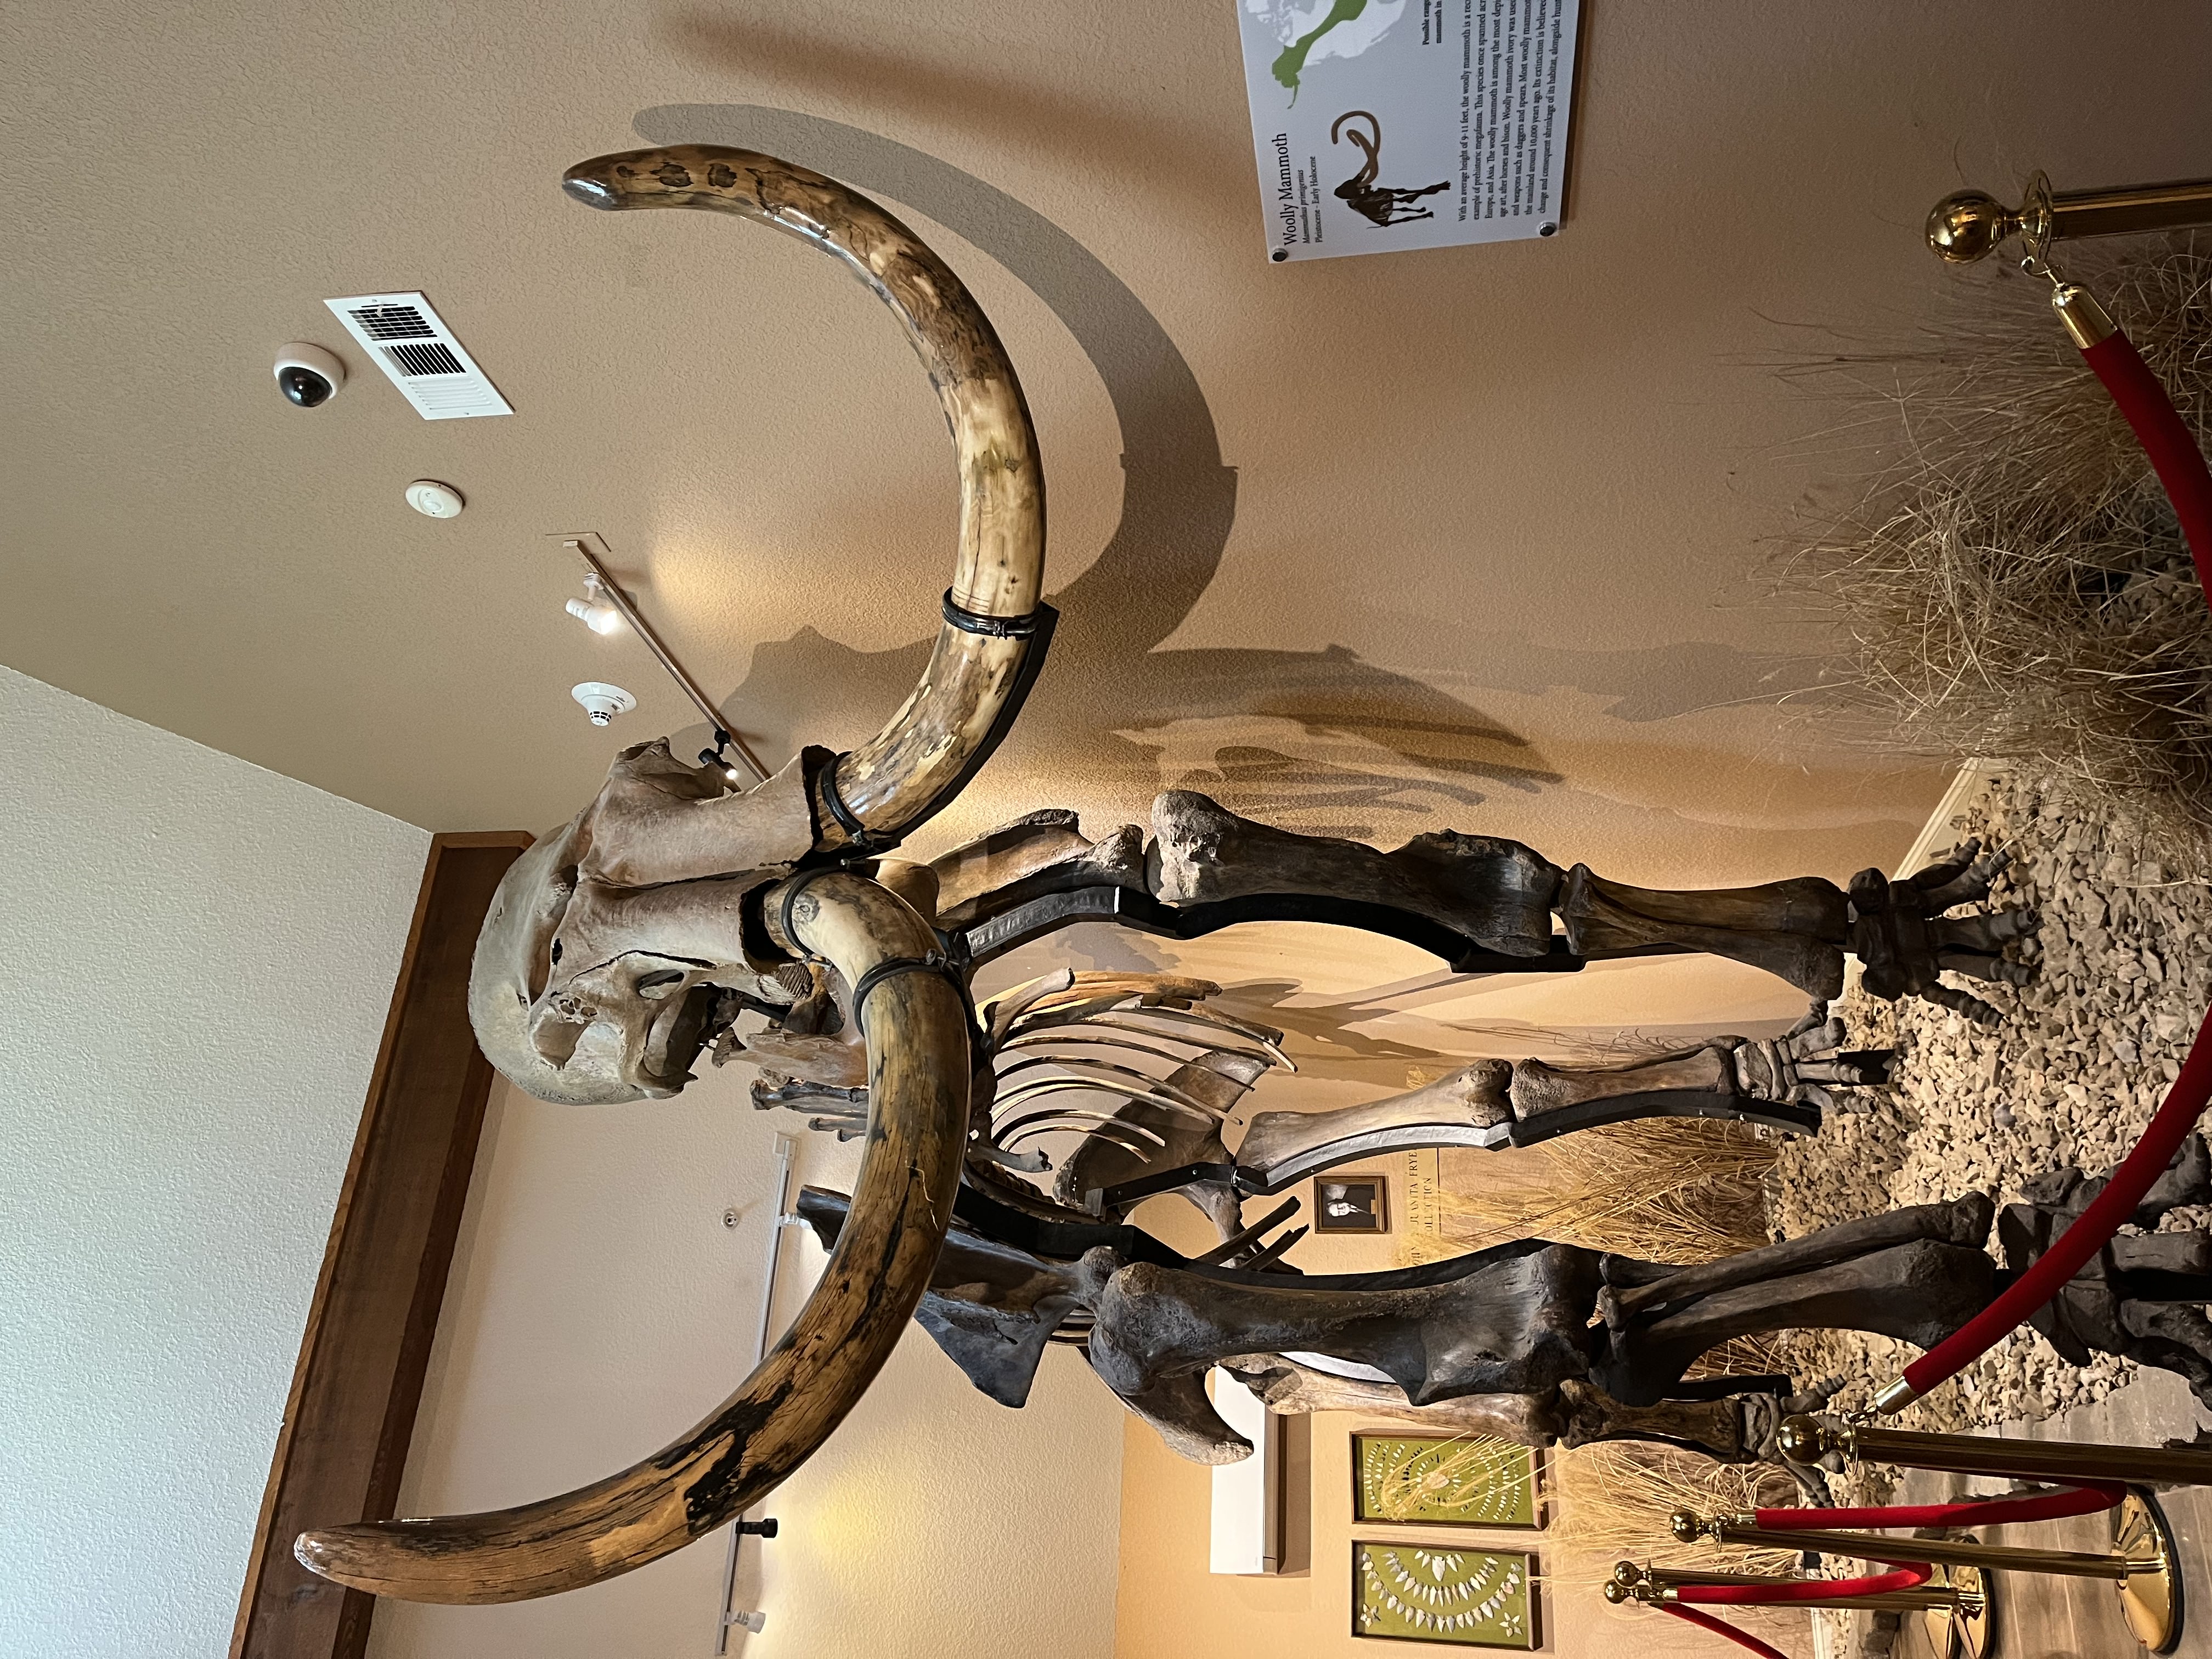 A wooly mammoth skeleton